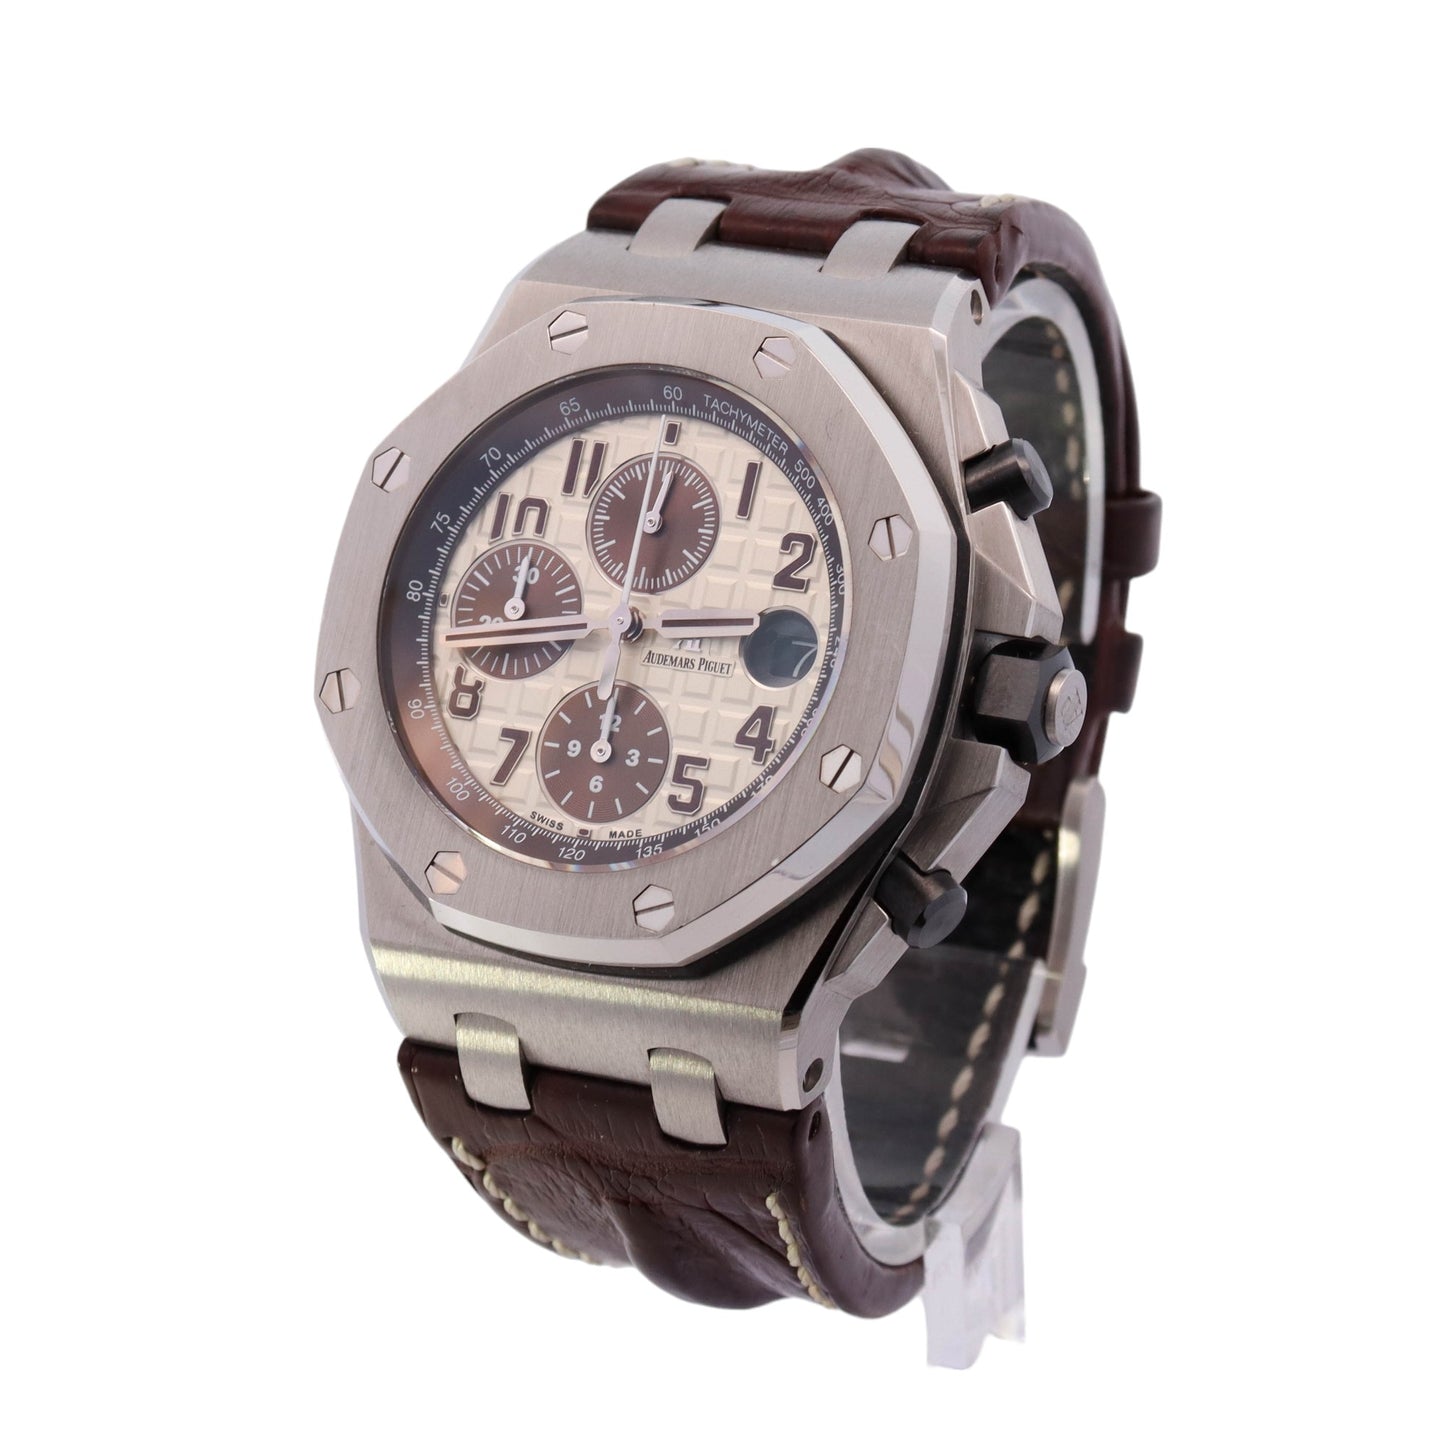 Audemar Piguet Royal Oak Offshore Stainless Steel 42mm Tan Chronograph Dial Watch Reference #: 26470ST.OO.A801CR.01 - Happy Jewelers Fine Jewelry Lifetime Warranty